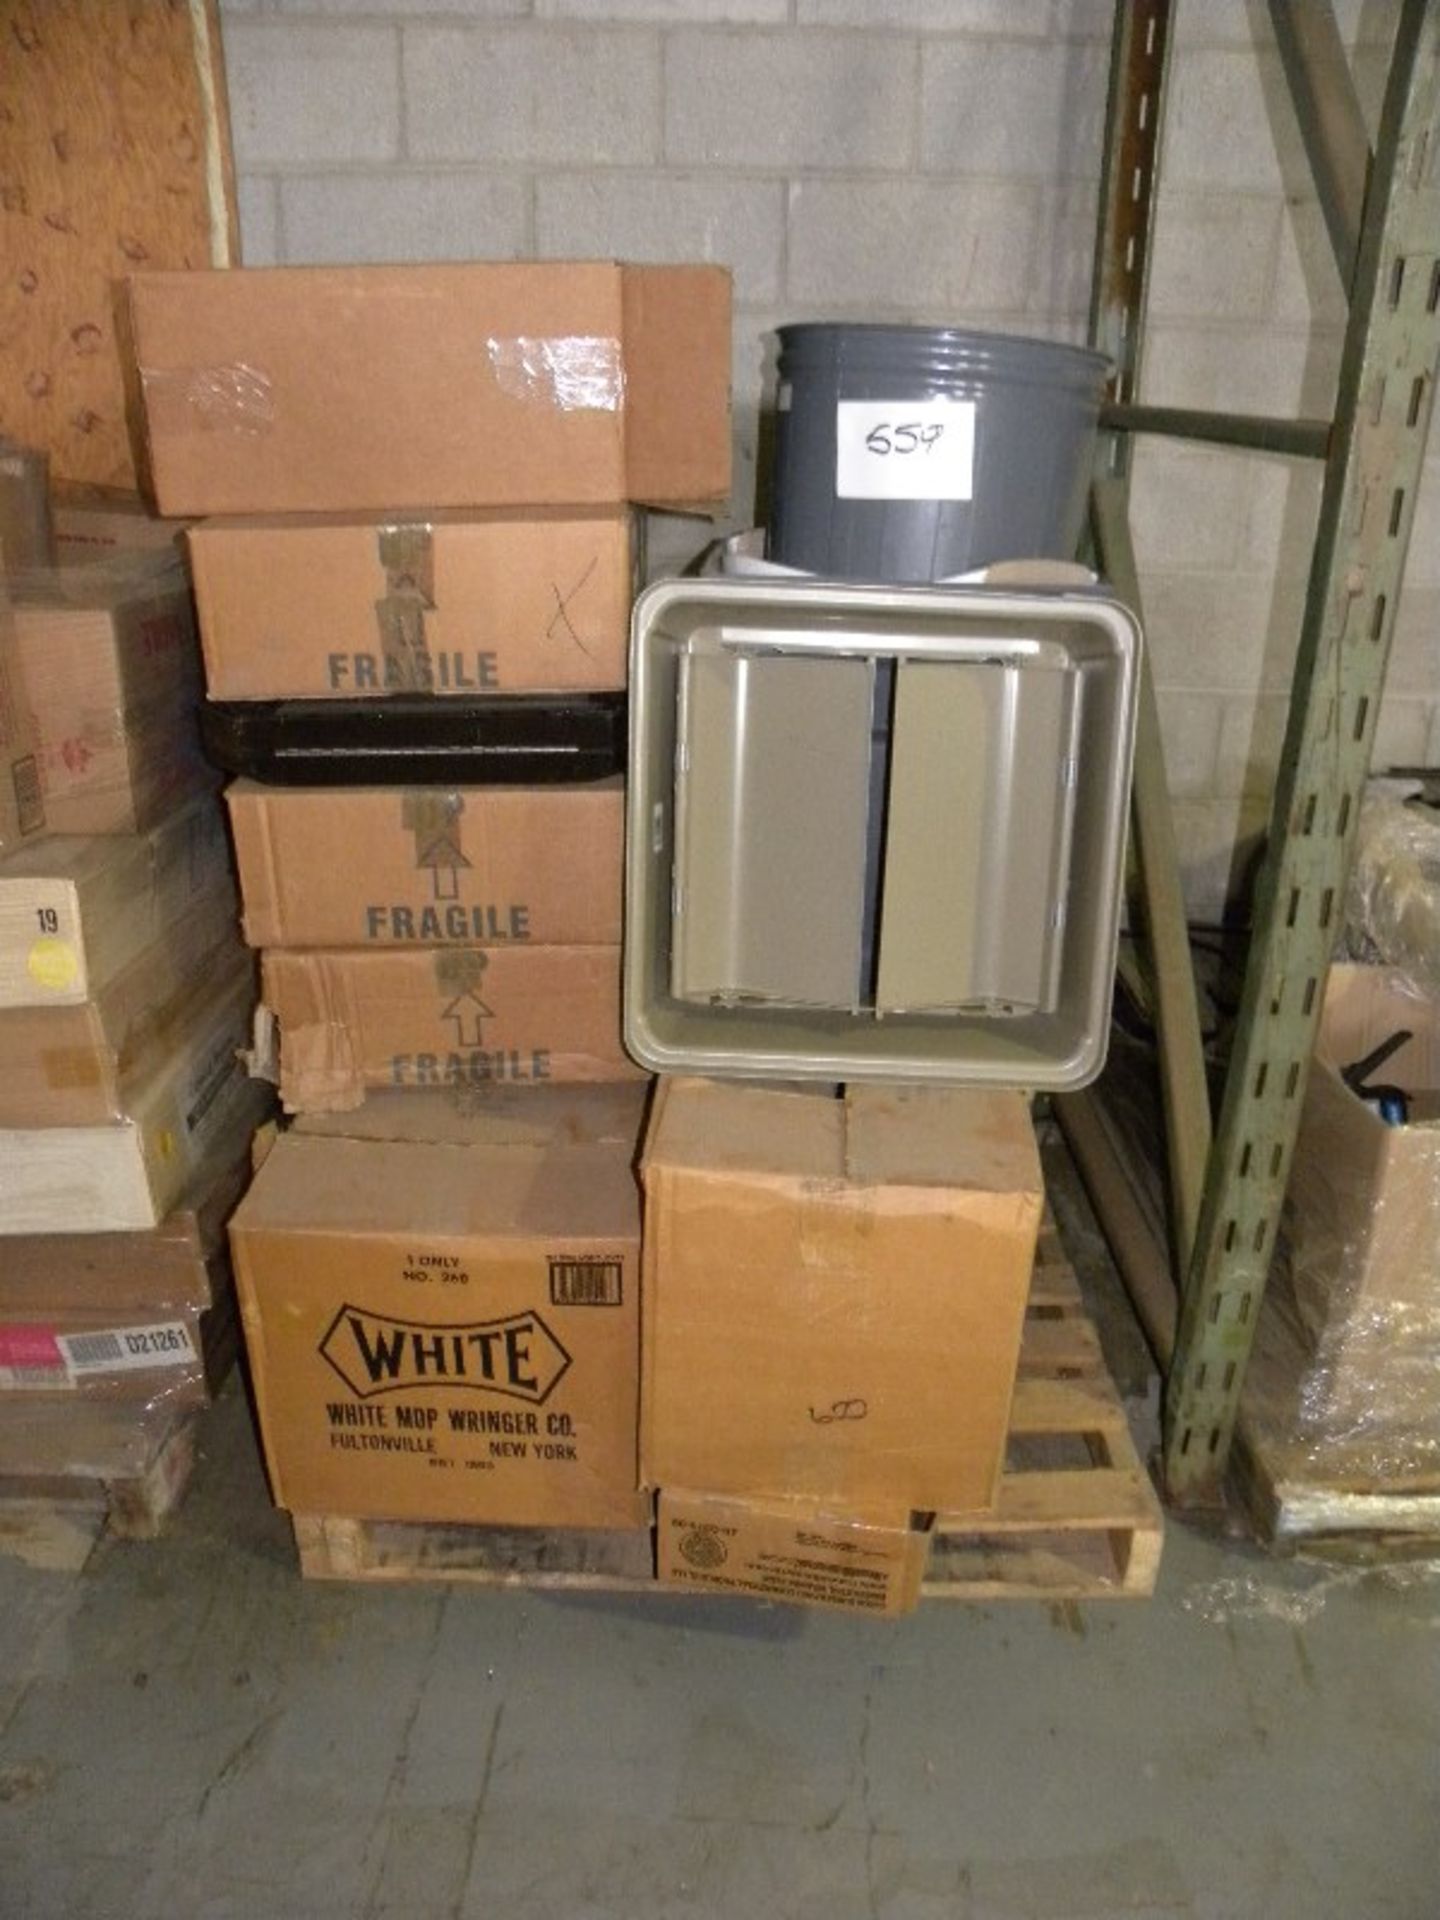 LOT OF MIXED WASTE BINS - 1 SKID